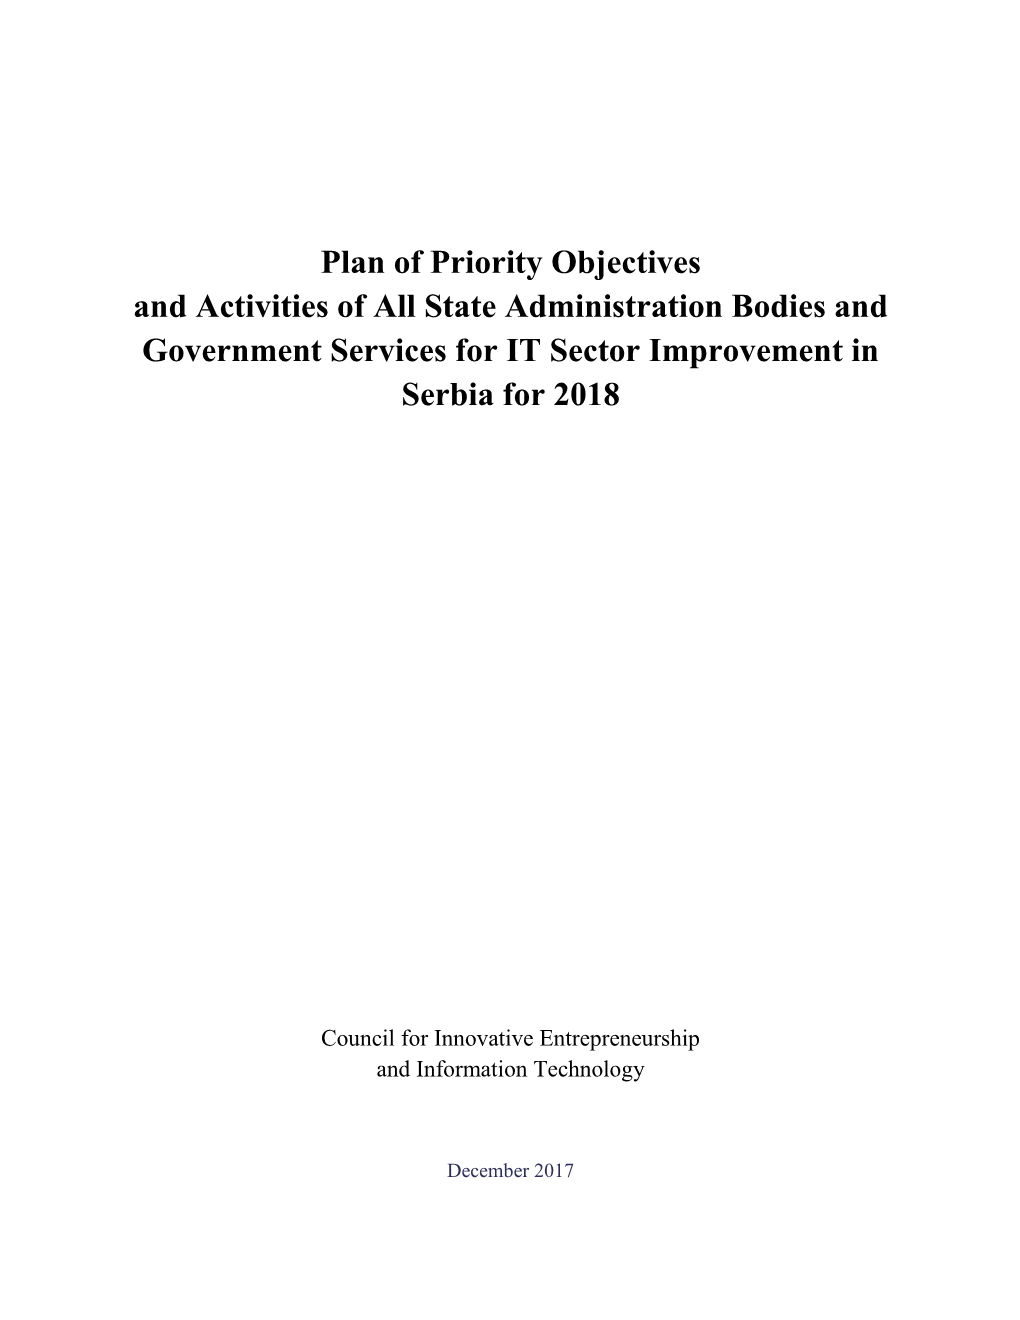 Plan of Priority Objectives and Activities of All State Administration Bodies and Government Services for IT Sector Improvement in Serbia for 2018